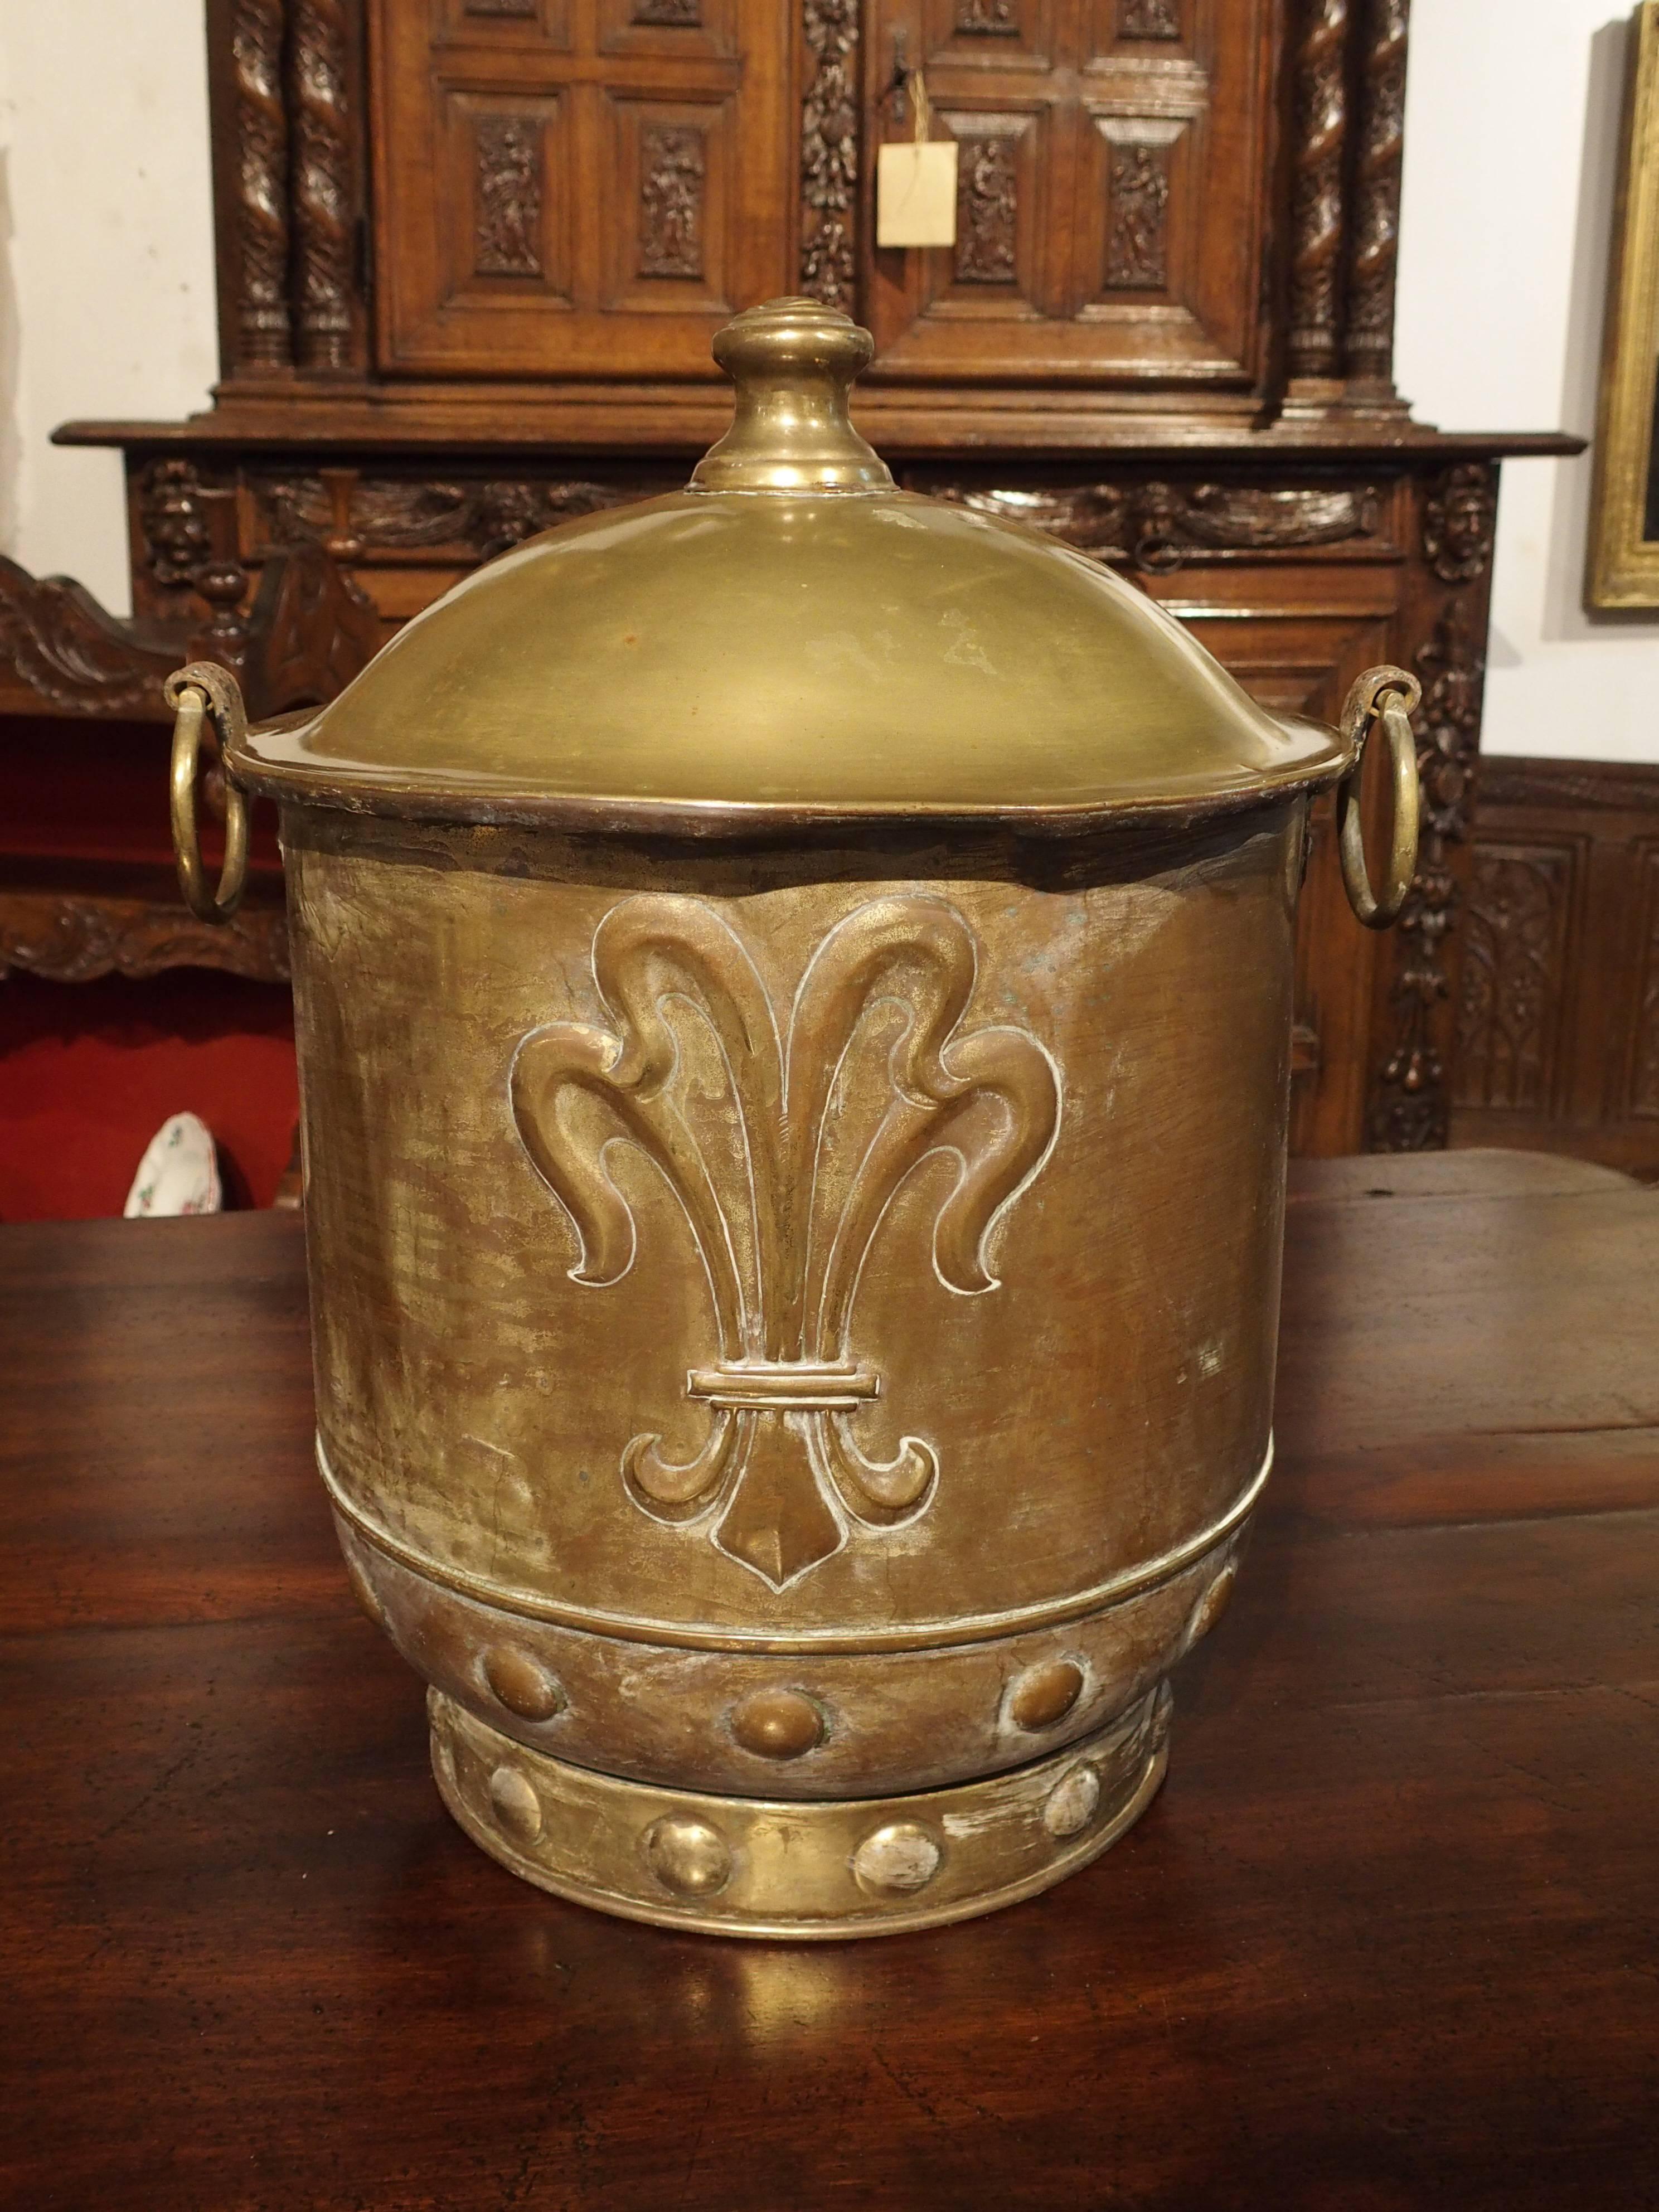 This wonderful large brass container from France has motifs of a repousse helmeted shield surrounded by scrolling acanthus leaves. Three crown motifs are on the shield. The other side of the container has a large repousse Fleur de Lis. At the bottom